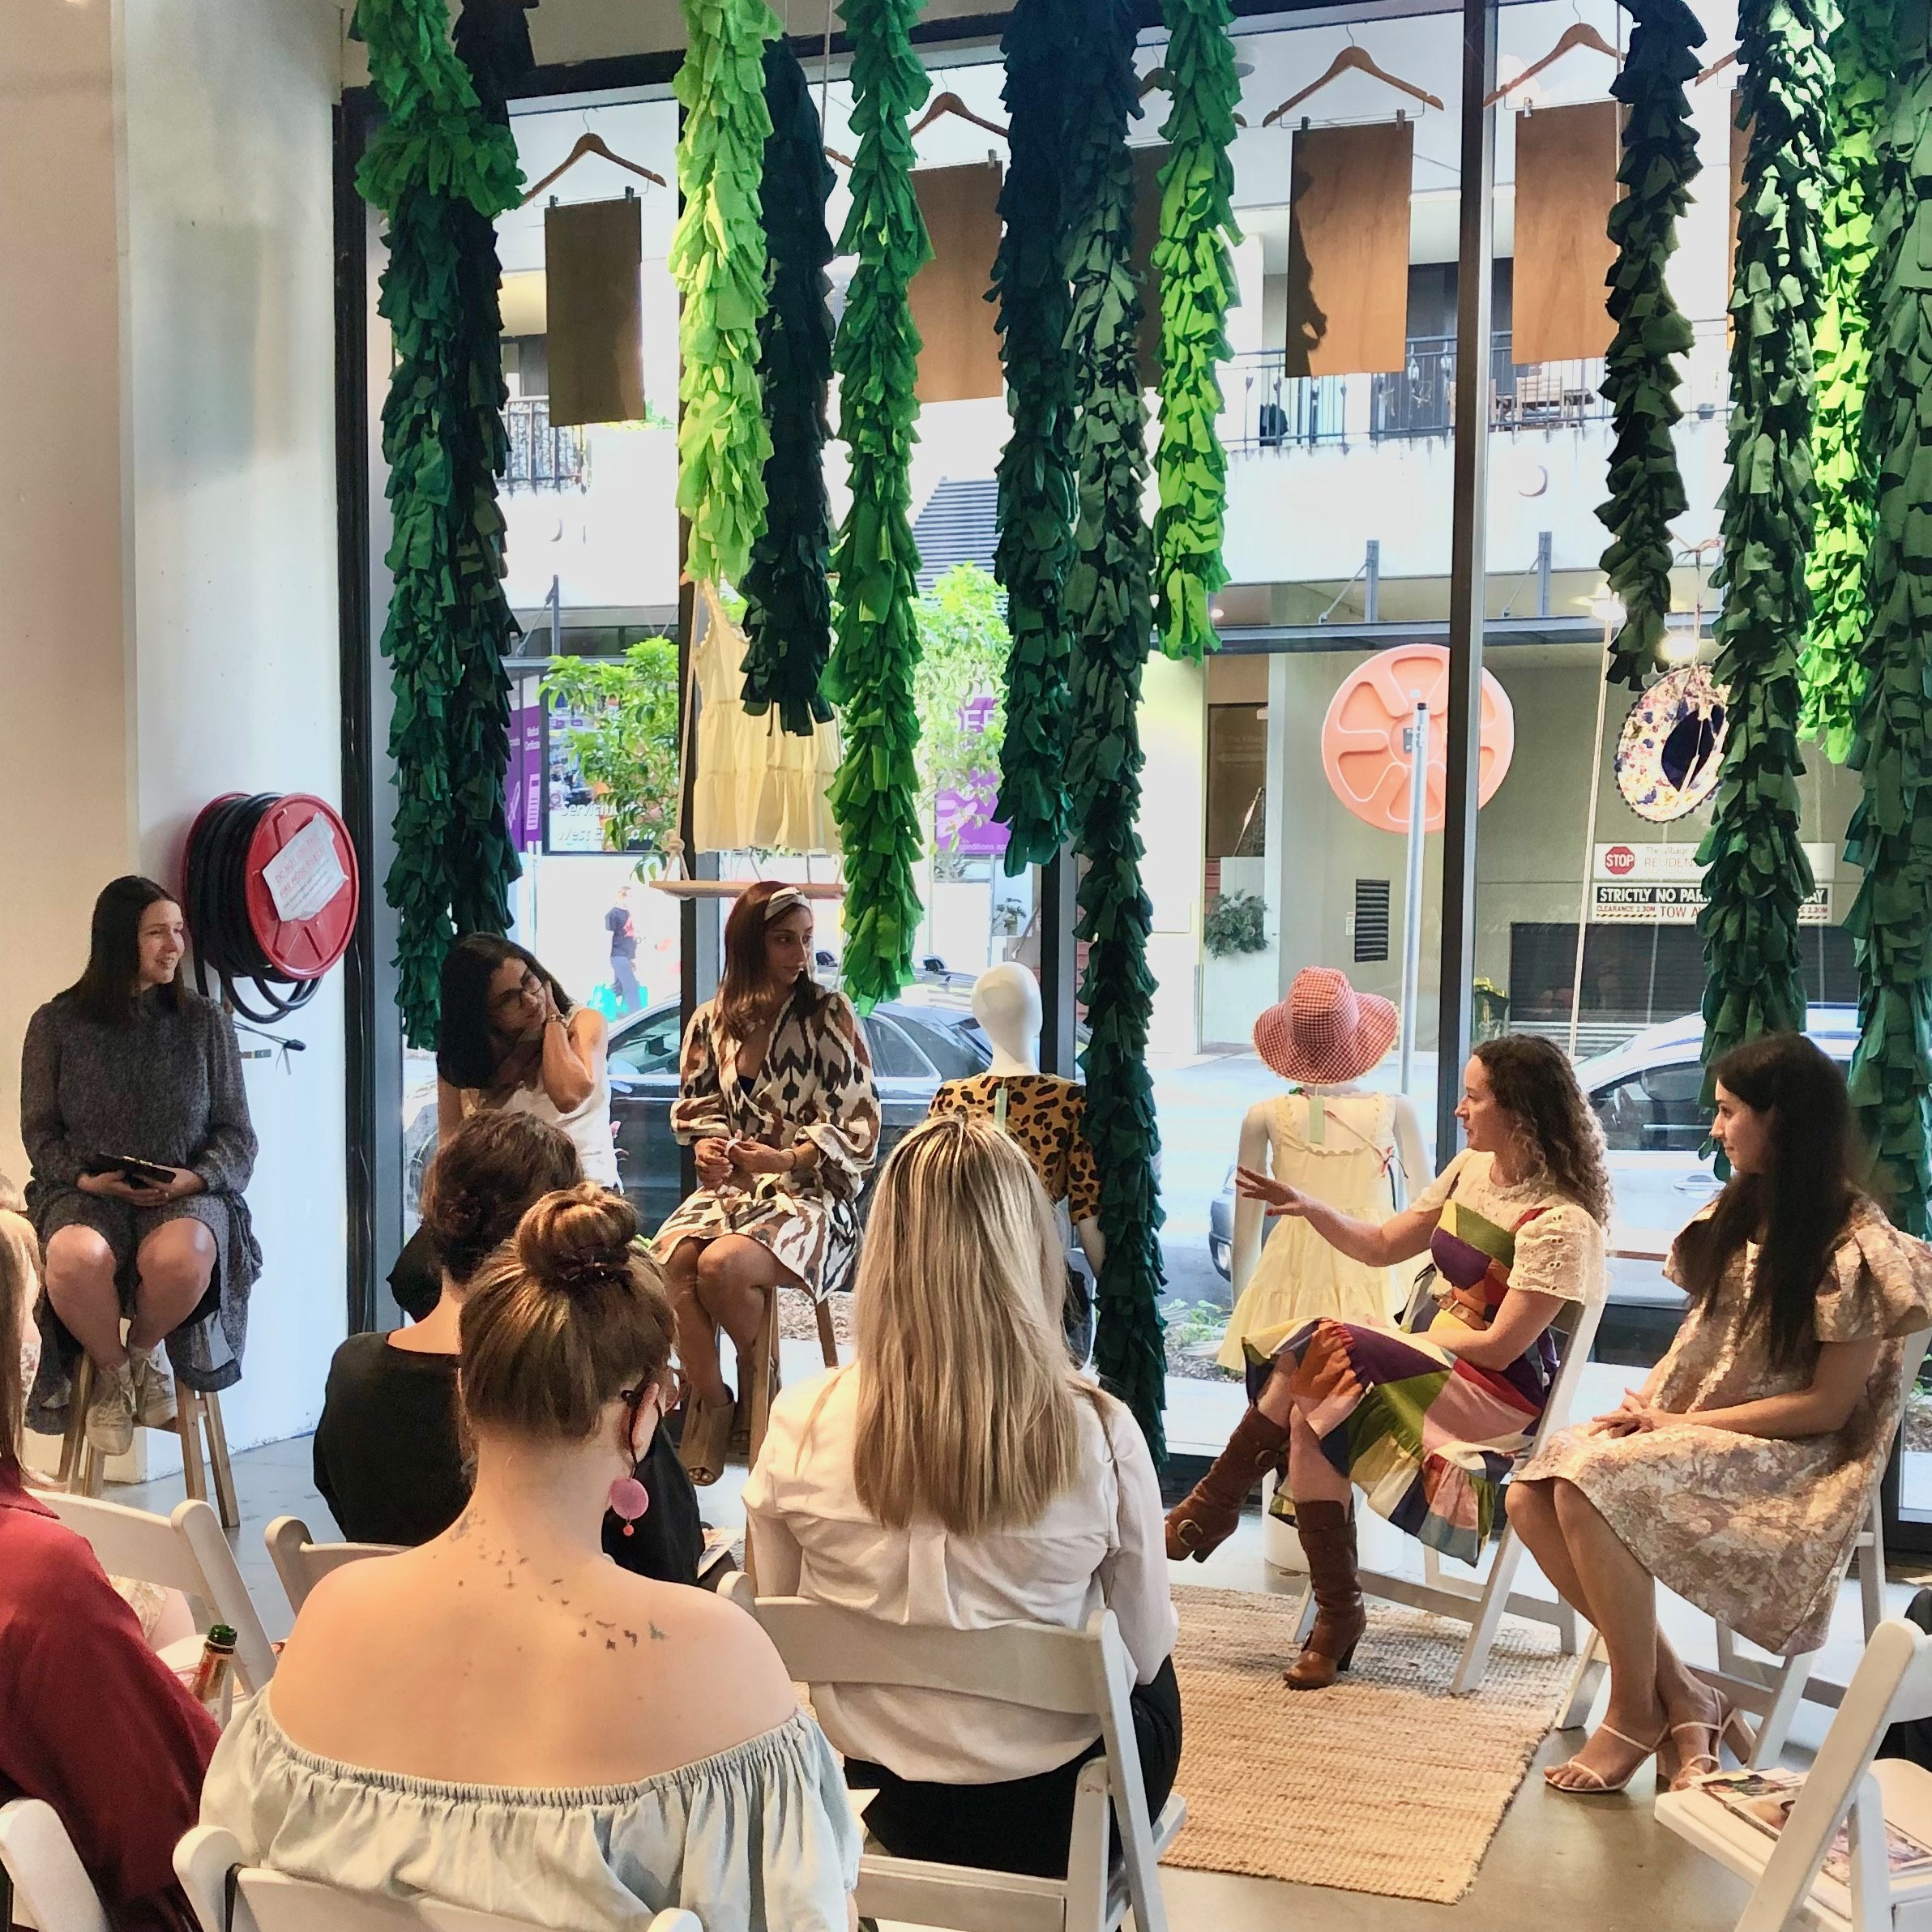 Panel discussion hosted by Britt's List on the topic of sustainability in fashion production